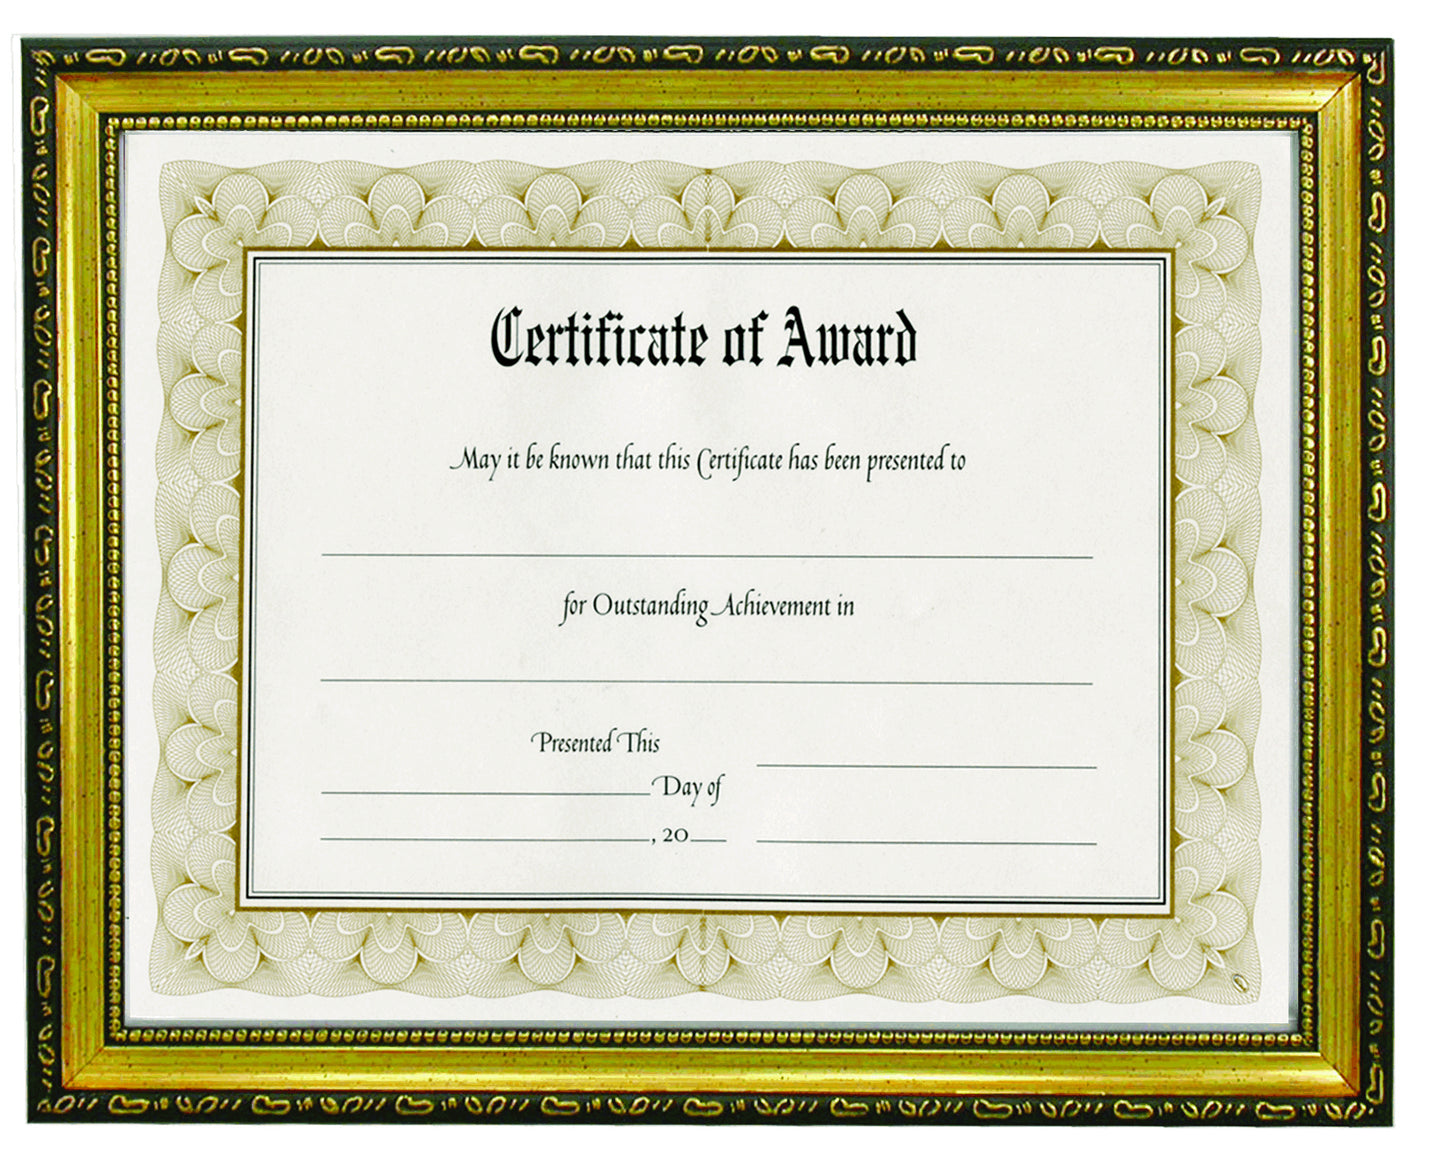 Deluxe Document Frame, 8.5" x 11, Gold